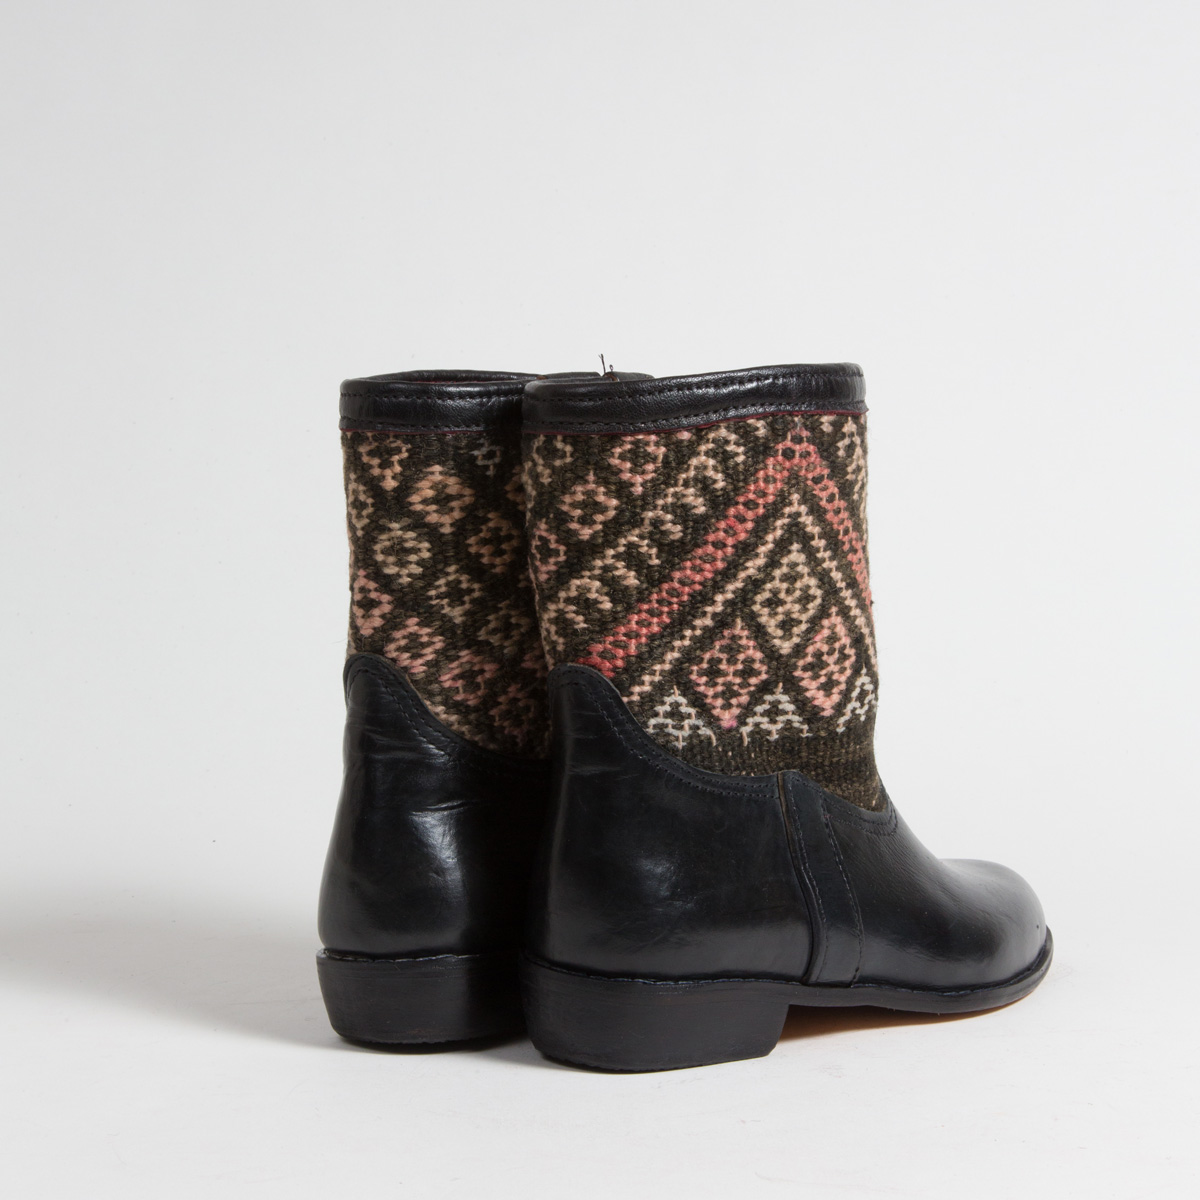 Bottines Kilim cuir mababouche artisanales (Réf. RPN24-40)